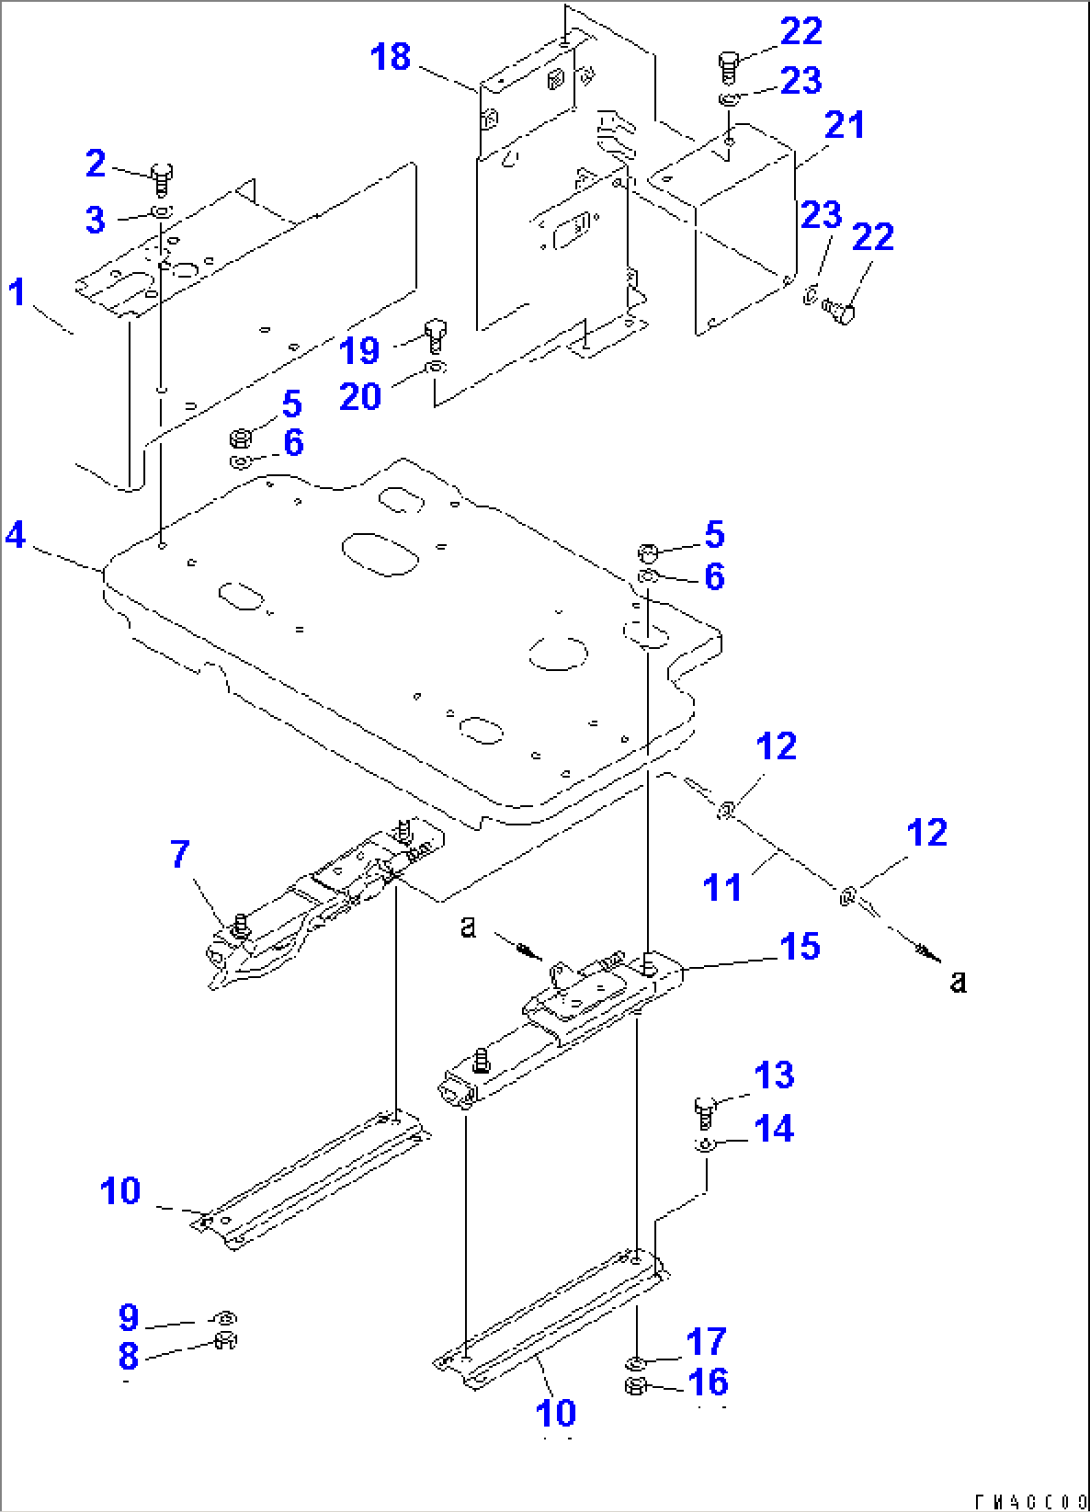 RIGHT STAND (STAND¤ FRAME AND ADJUSTER)